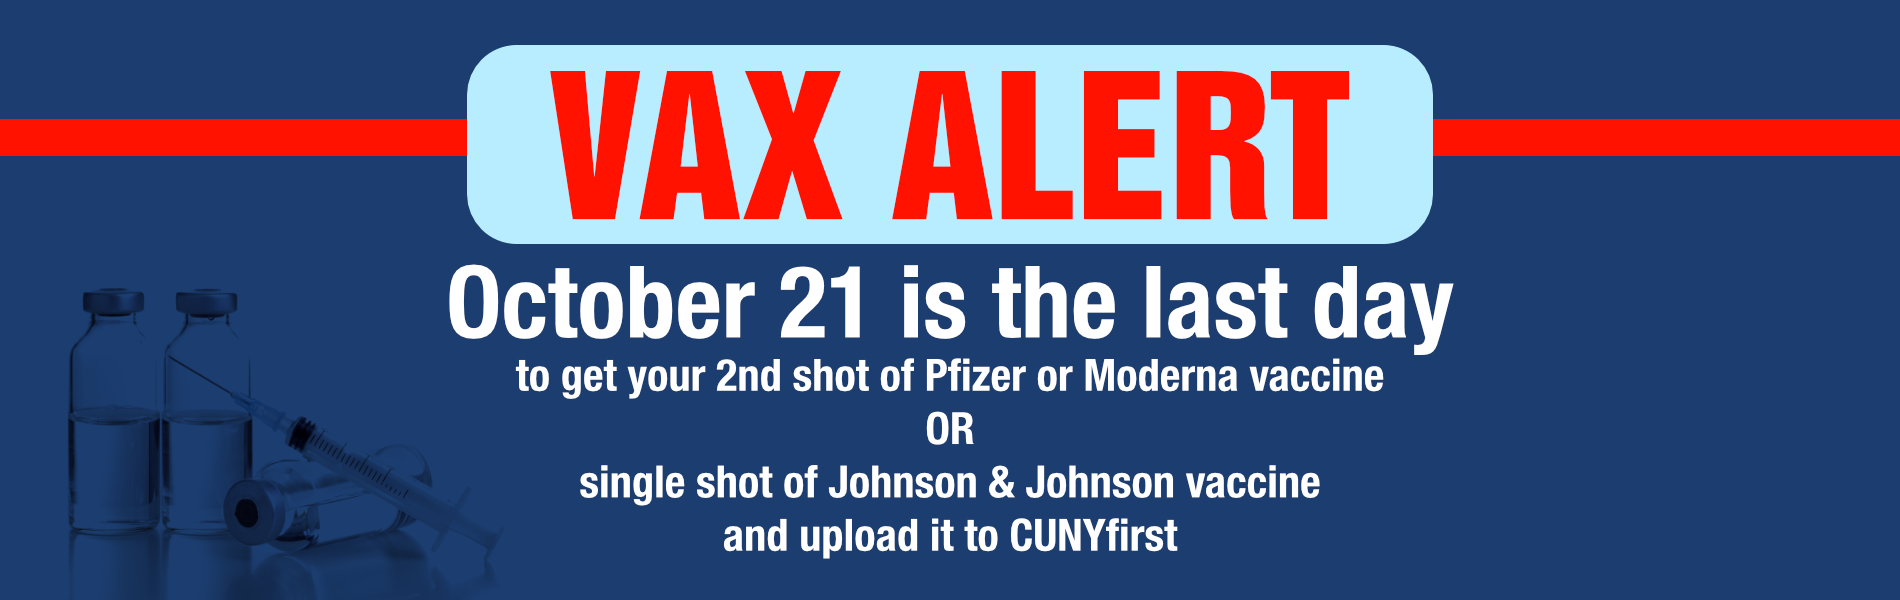 VAX ALERT  October 21 is the last day October 21 is the last day   to get your 2nd shot of Pfizer or Moderna vaccine   OR   single shot of Johnson & Johnson vaccine   and upload it to CUNYfirst